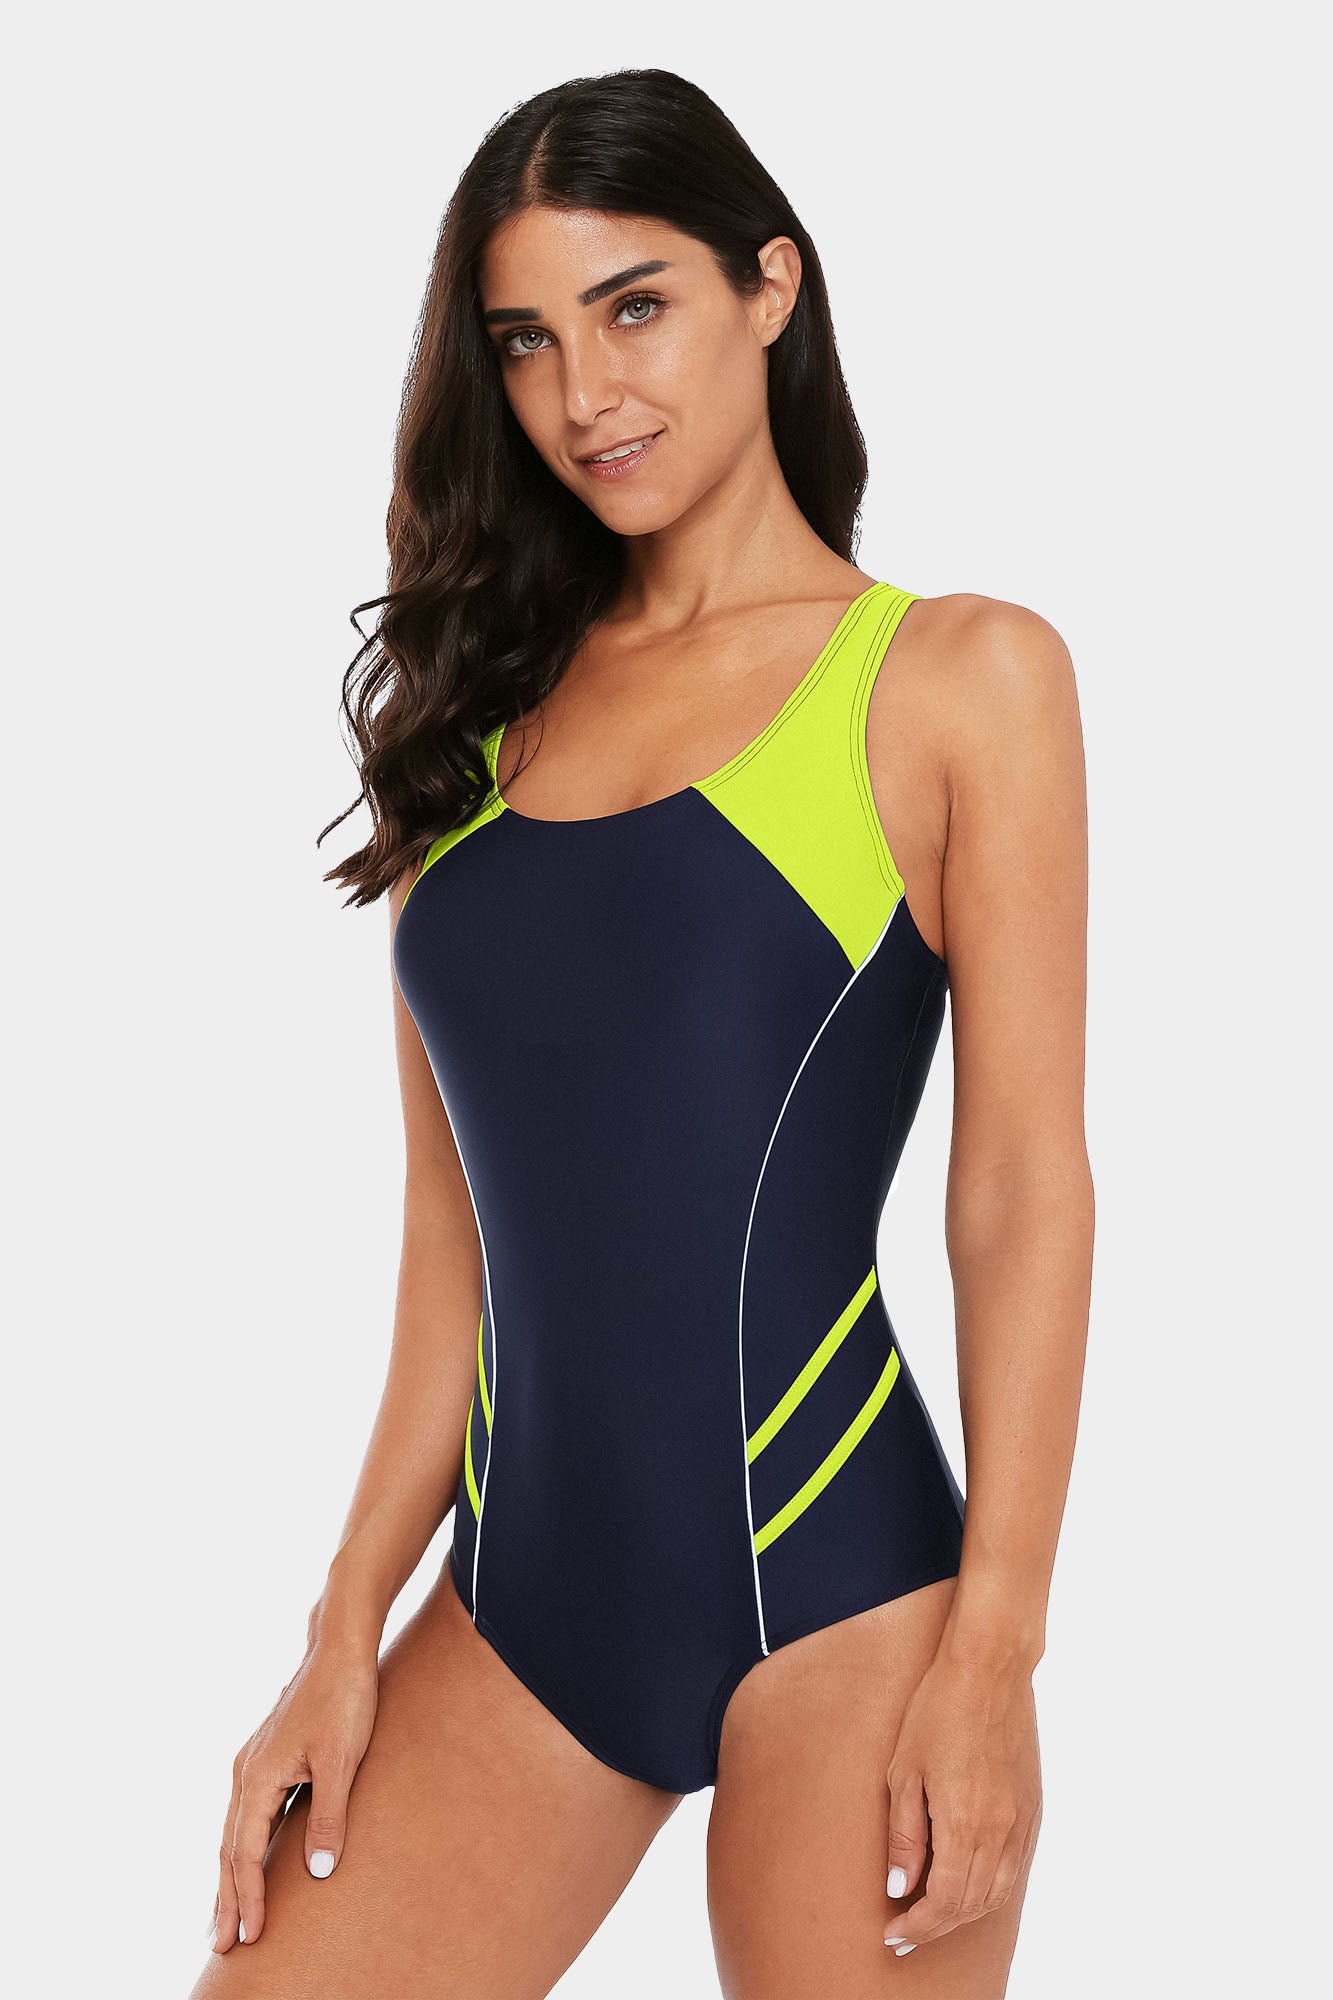 Attraco Yellow Women's Colorblock Slimming One Piece Swimsuit-Attraco | Fashion Outdoor Clothing